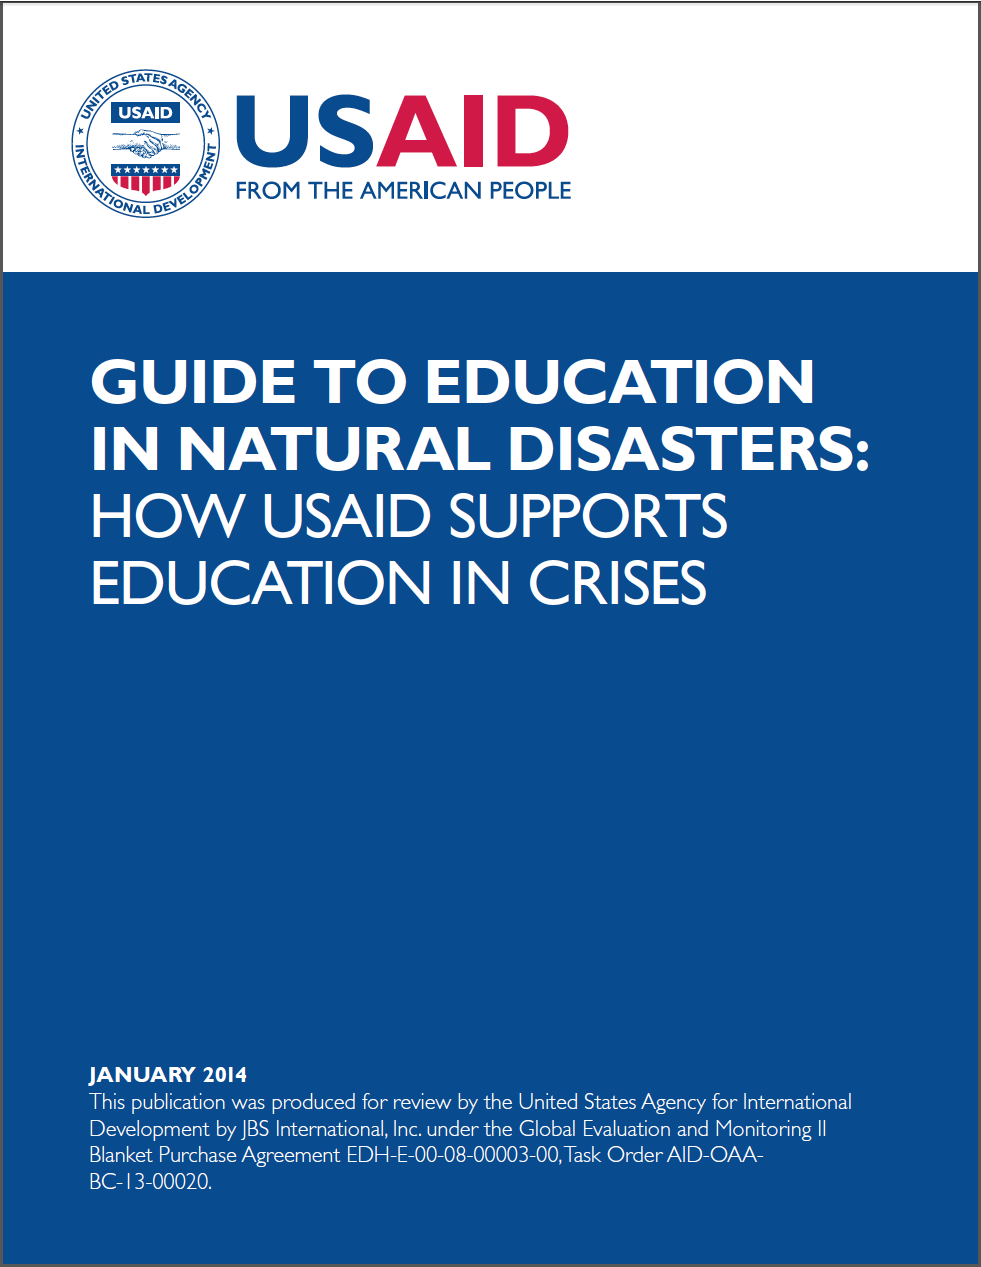 Navigating Natural Disasters: The Impact on Alternative Education Systems